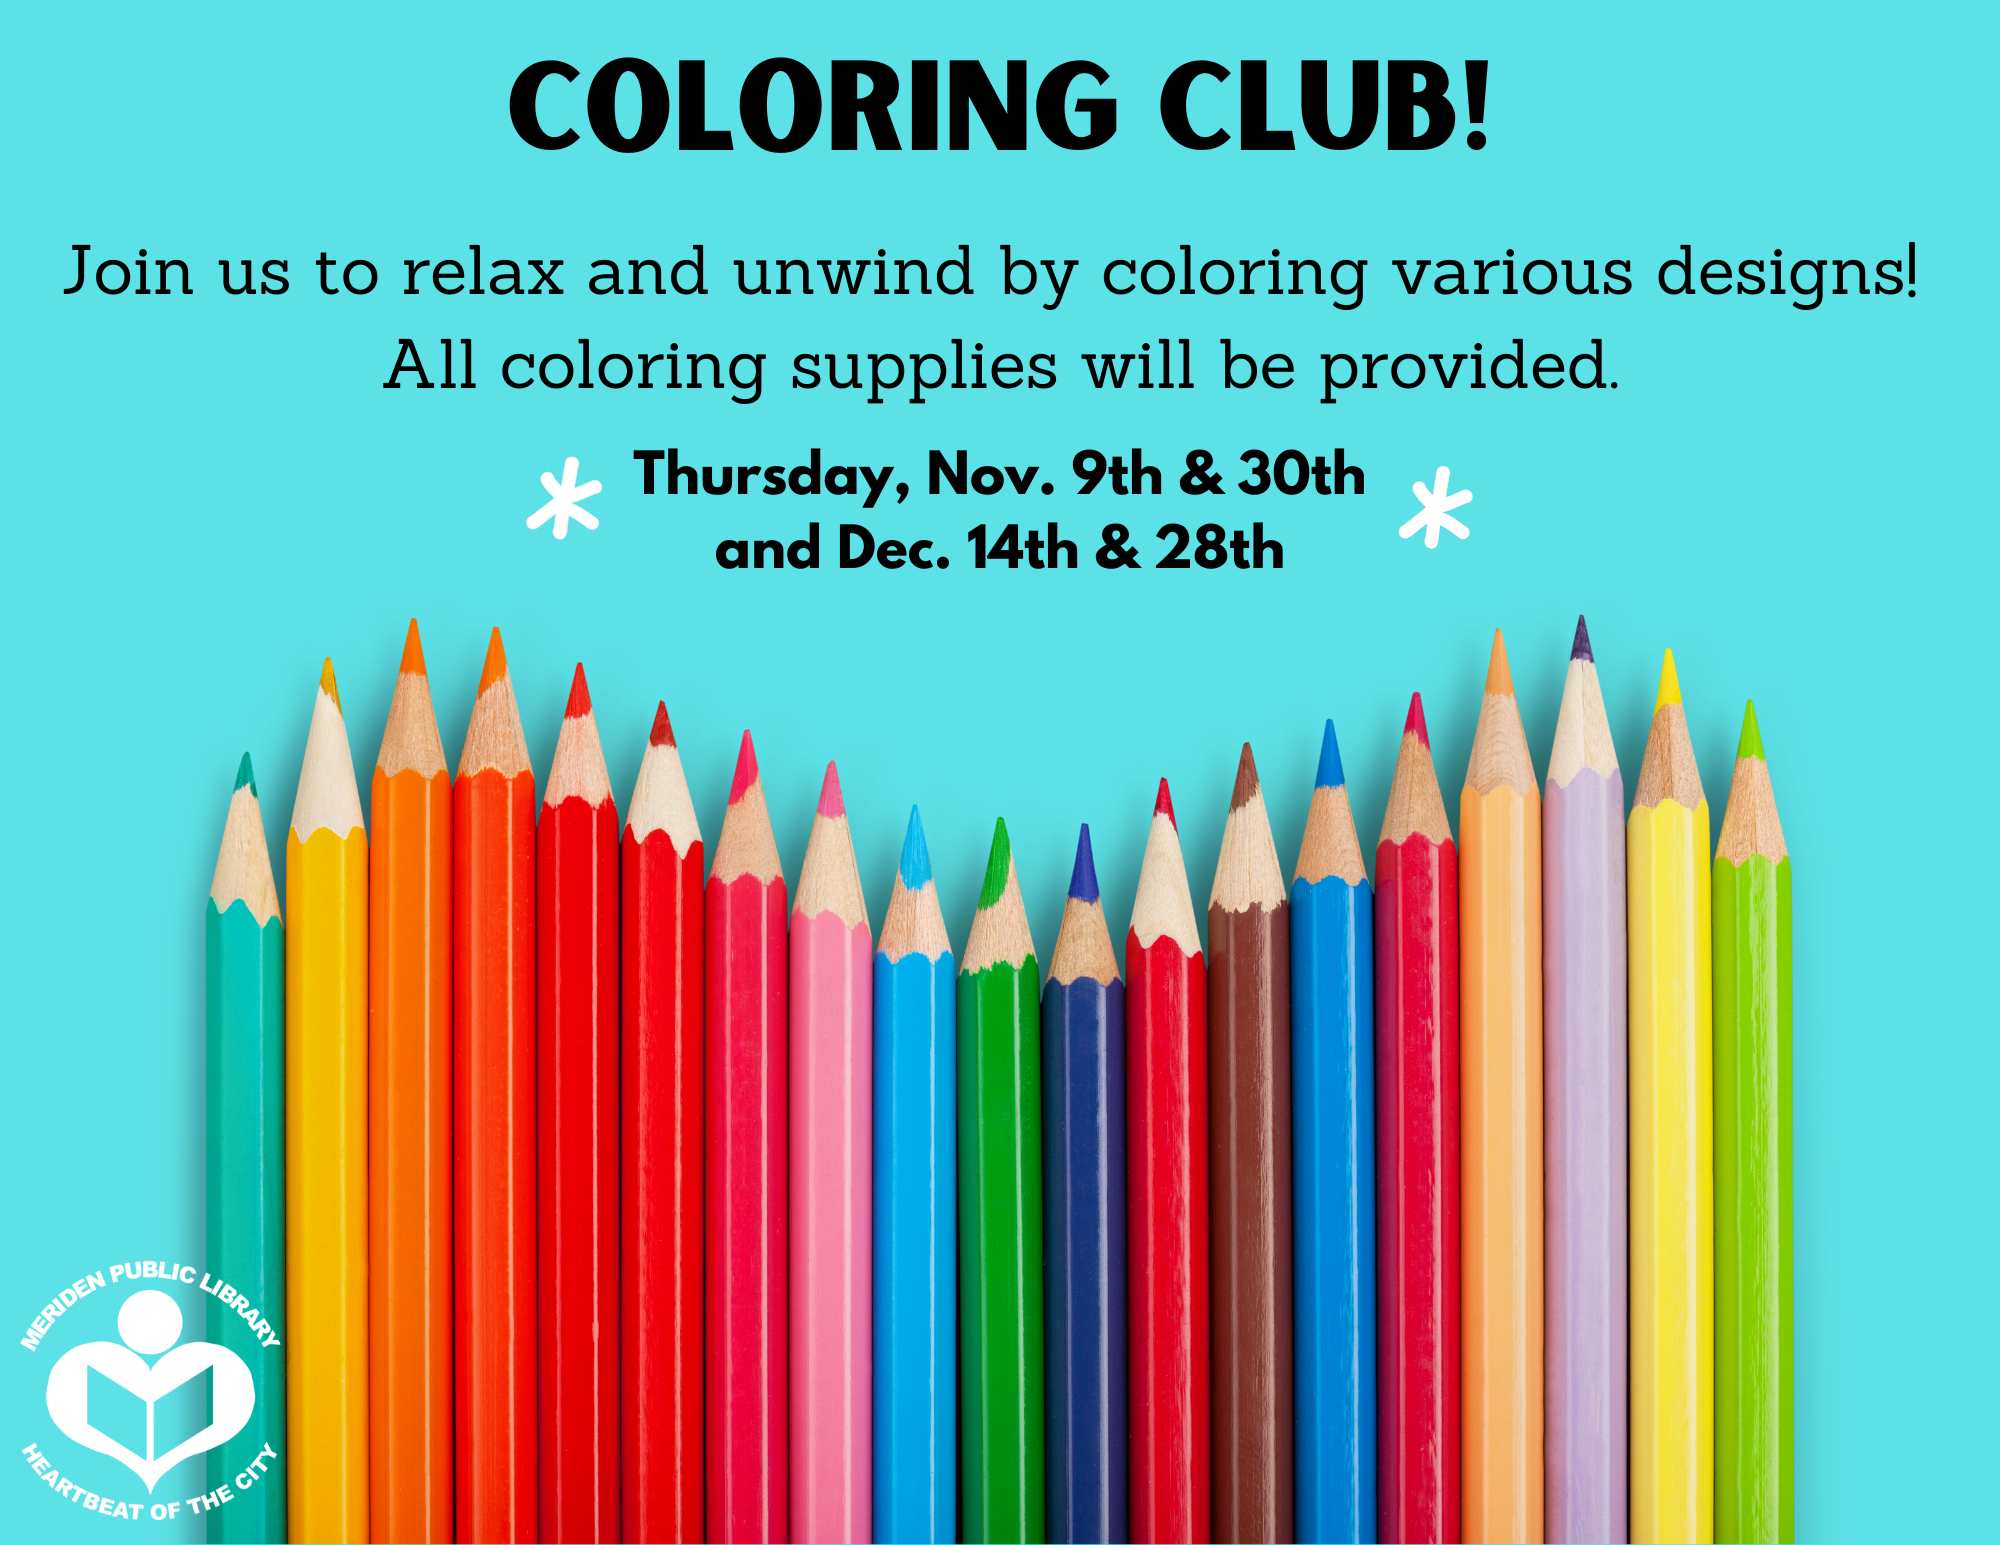 Light blue background with various colored pencils lined up